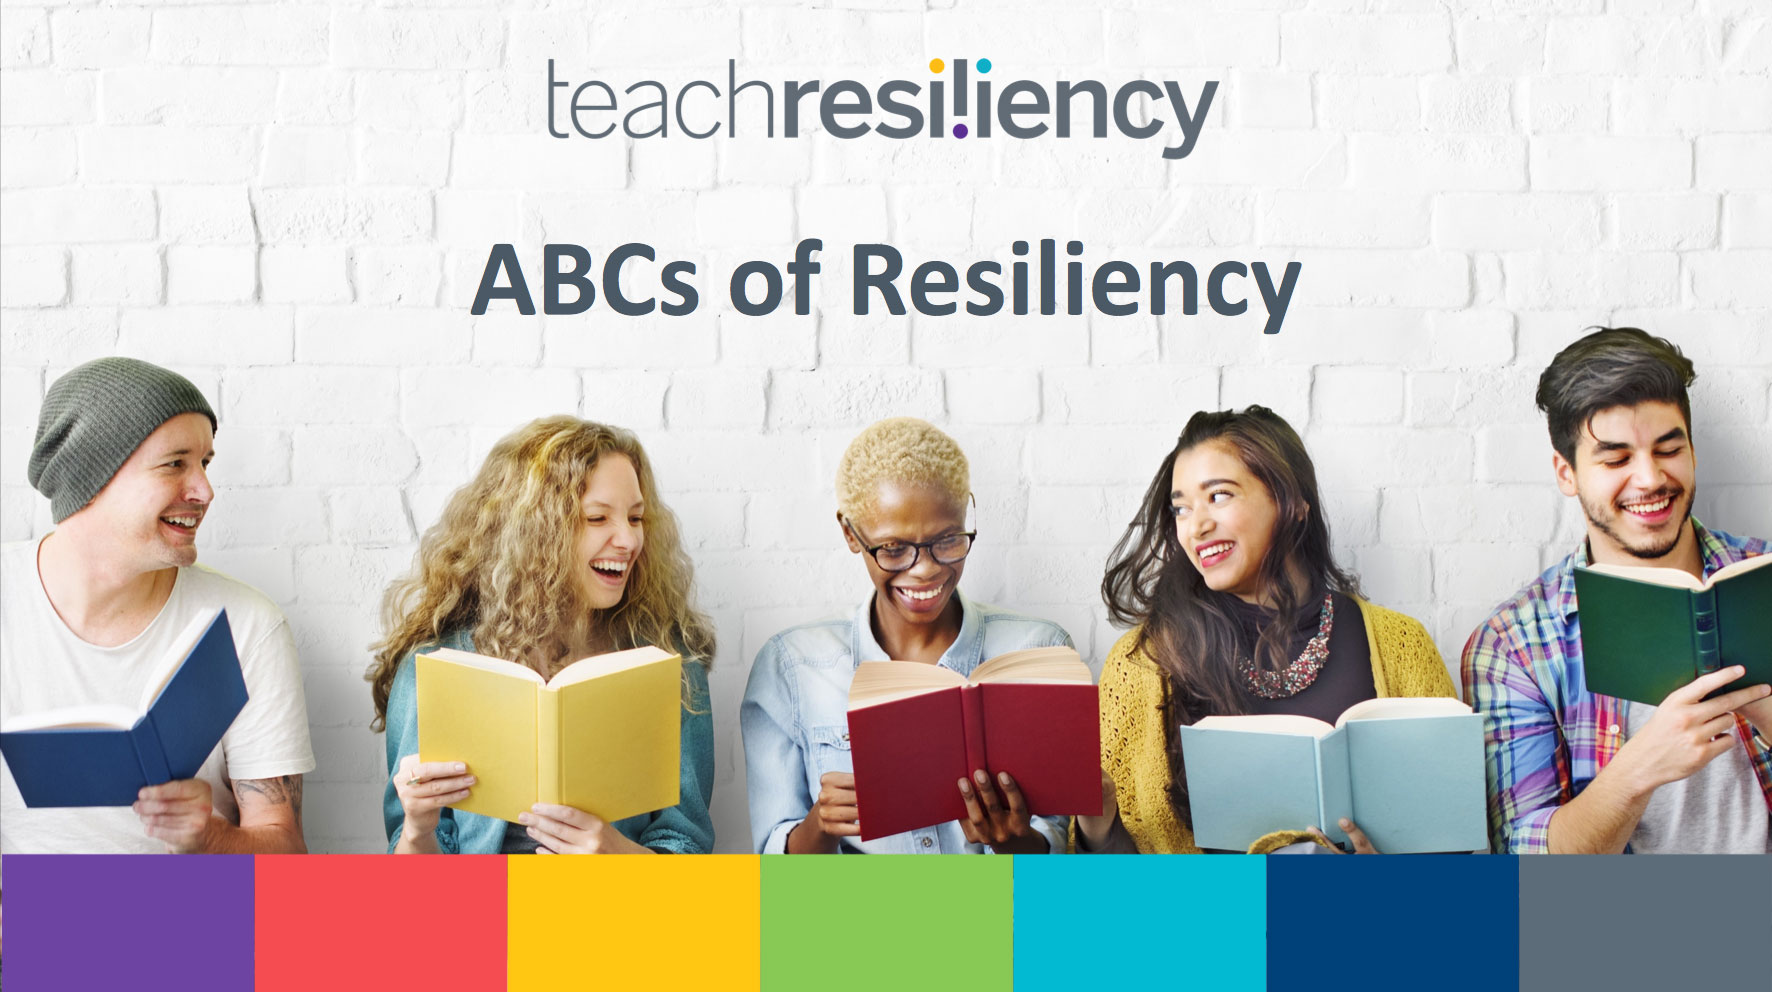 ABCs of resiliency